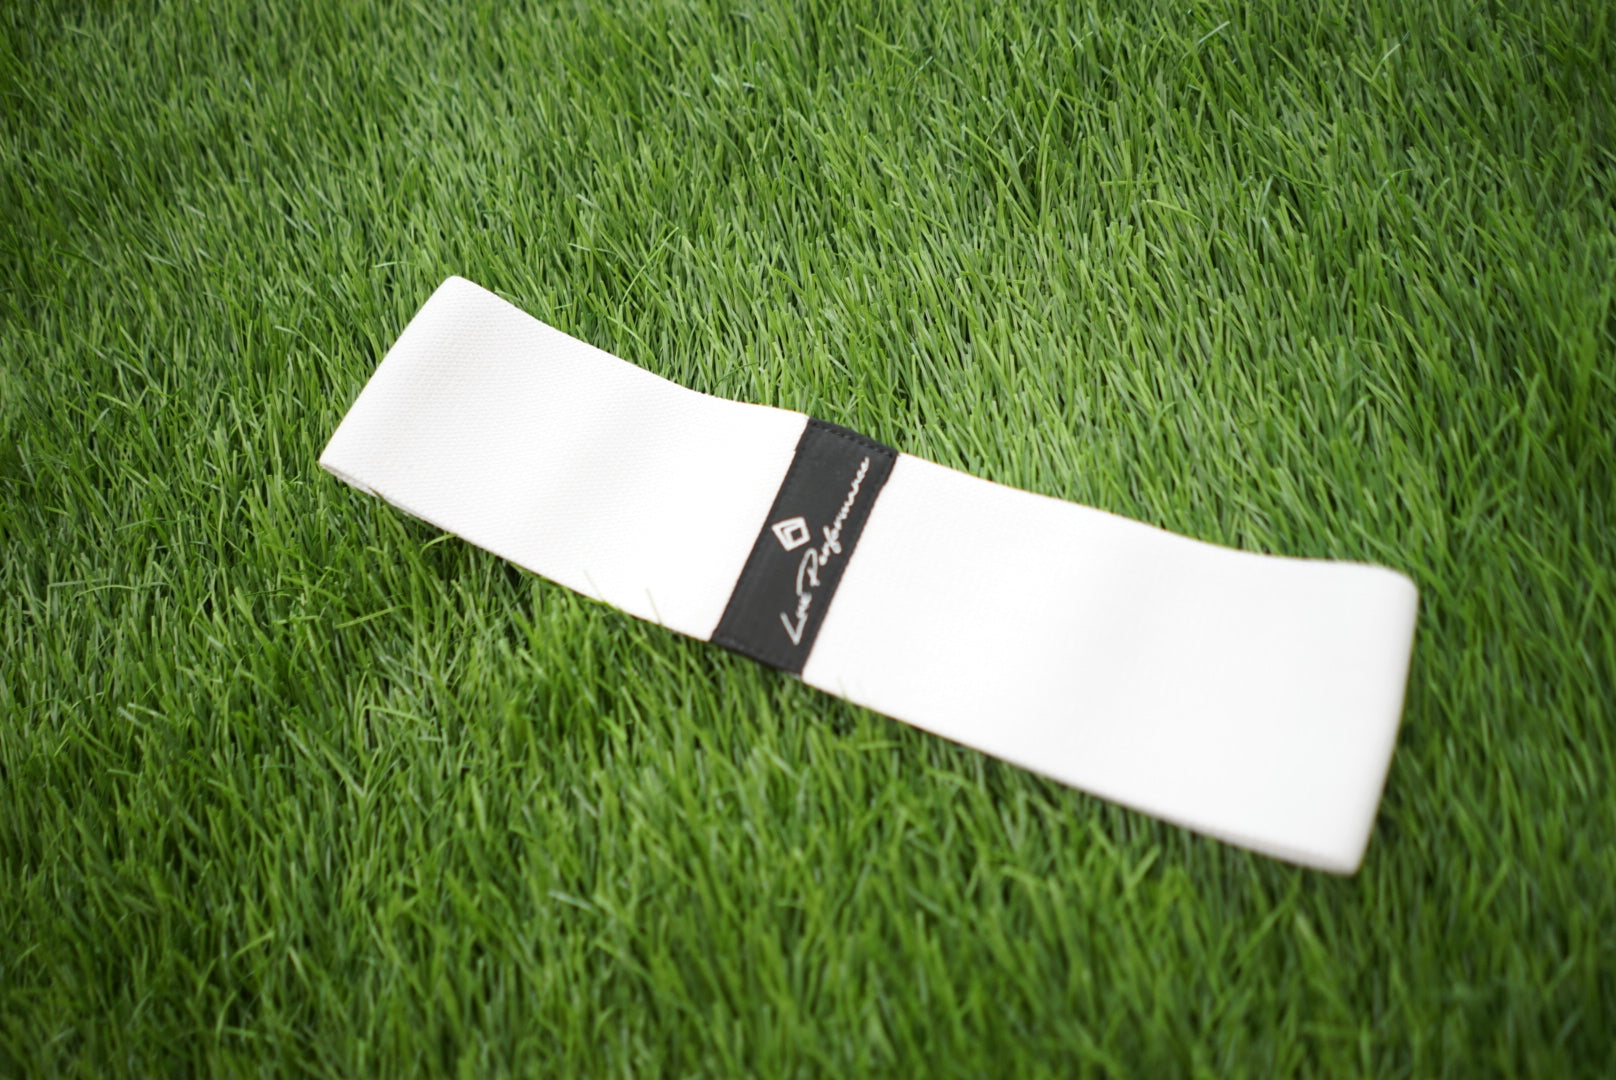 Lux Performance Resistance Bands